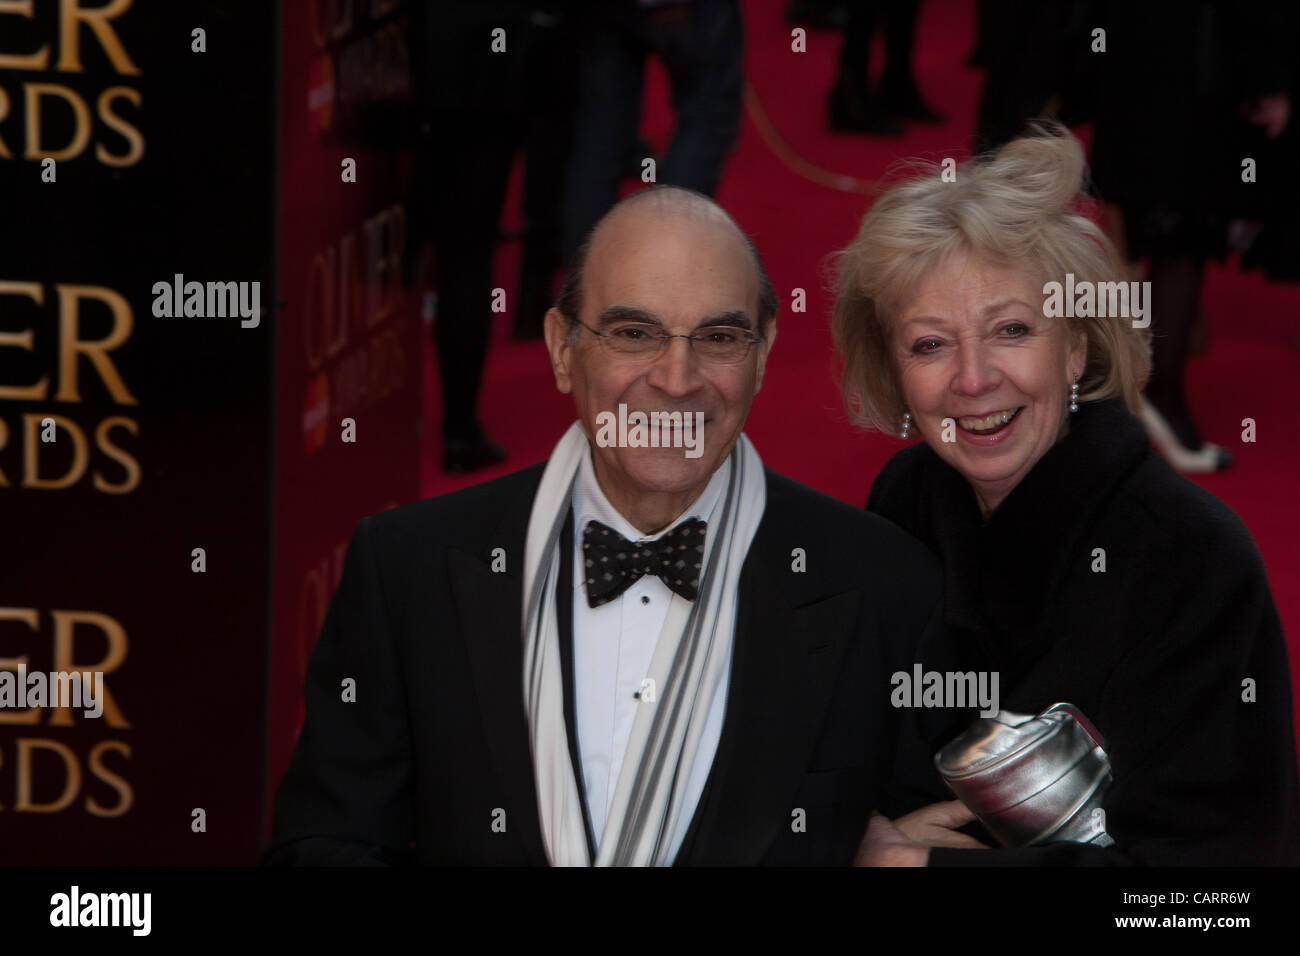 London, UK, 15/04/2012. Actress, David Suchet with his wife Sheila Ferris, a former actress, arrives at the 2012 Laurence Olivier Awards Stock Photo